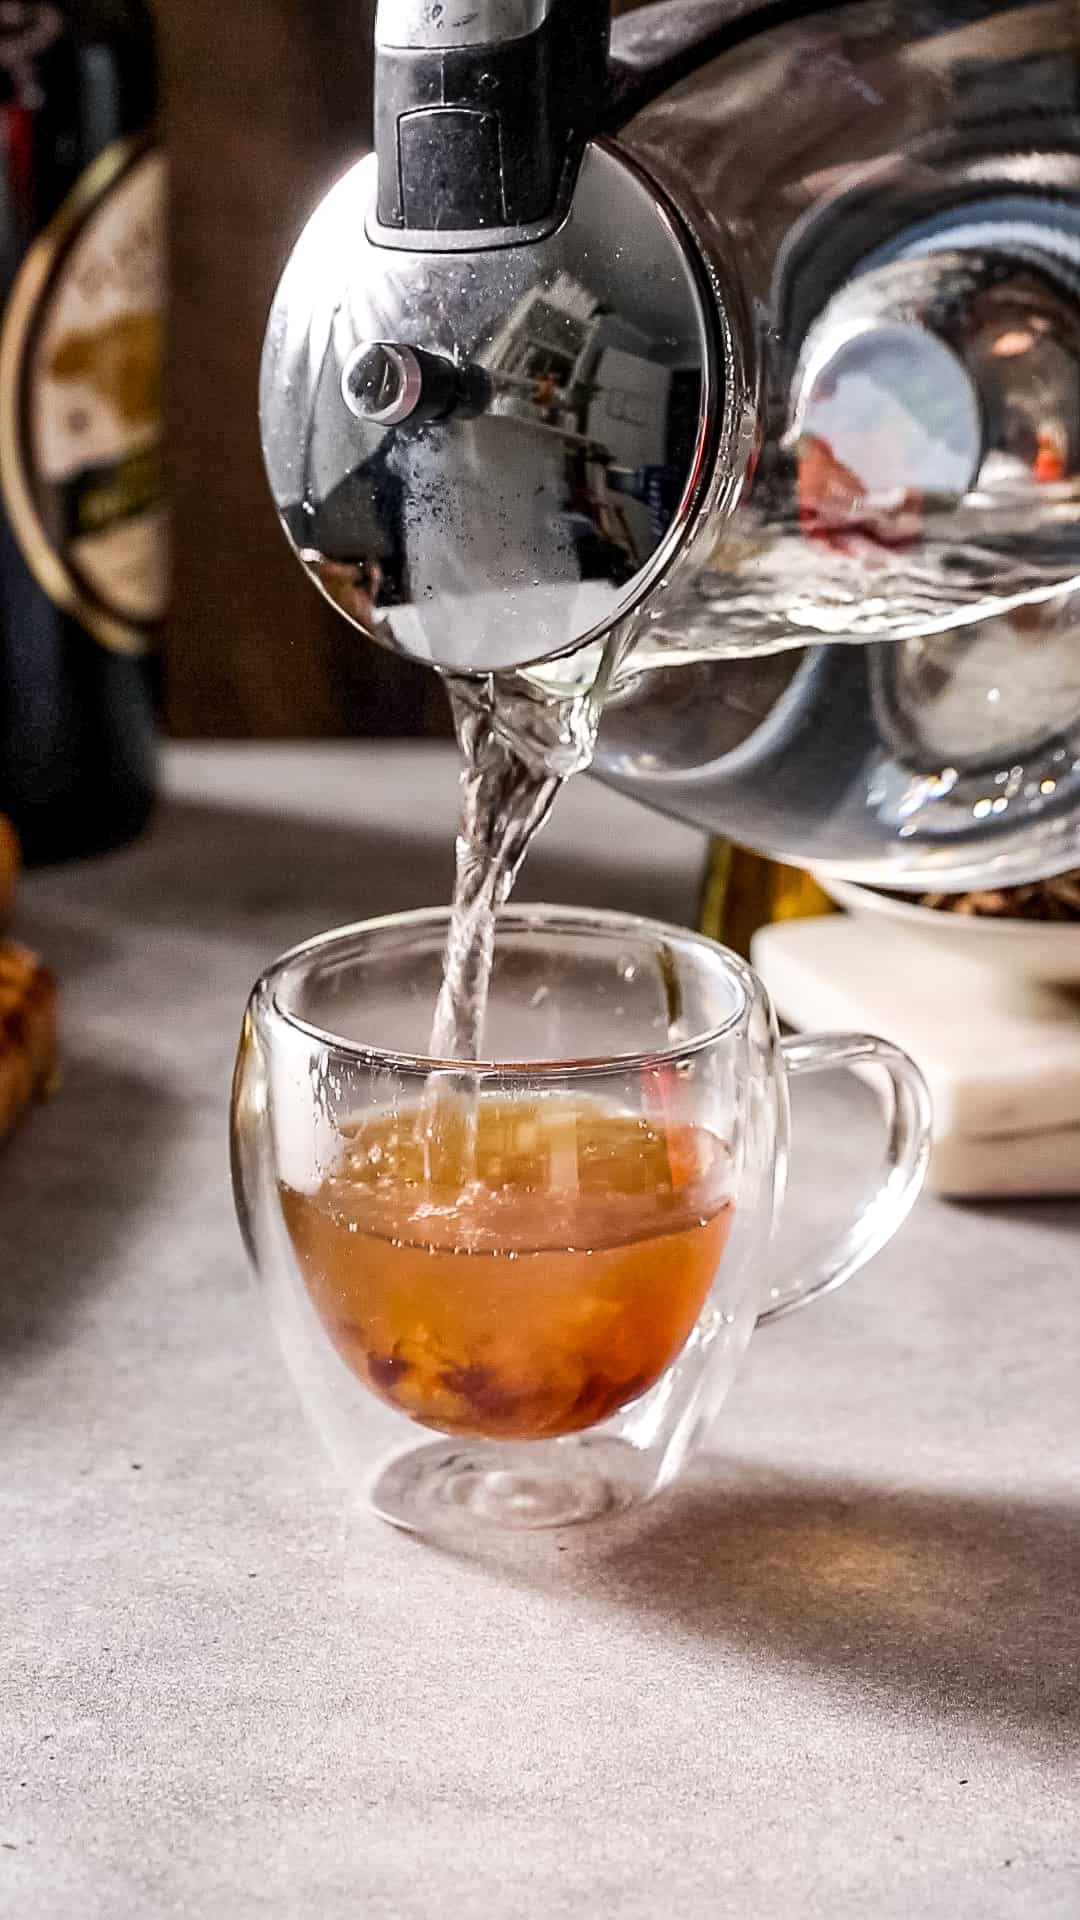 Hot water pouring from a kettle into a glass mug filled with an amber colored liquid.